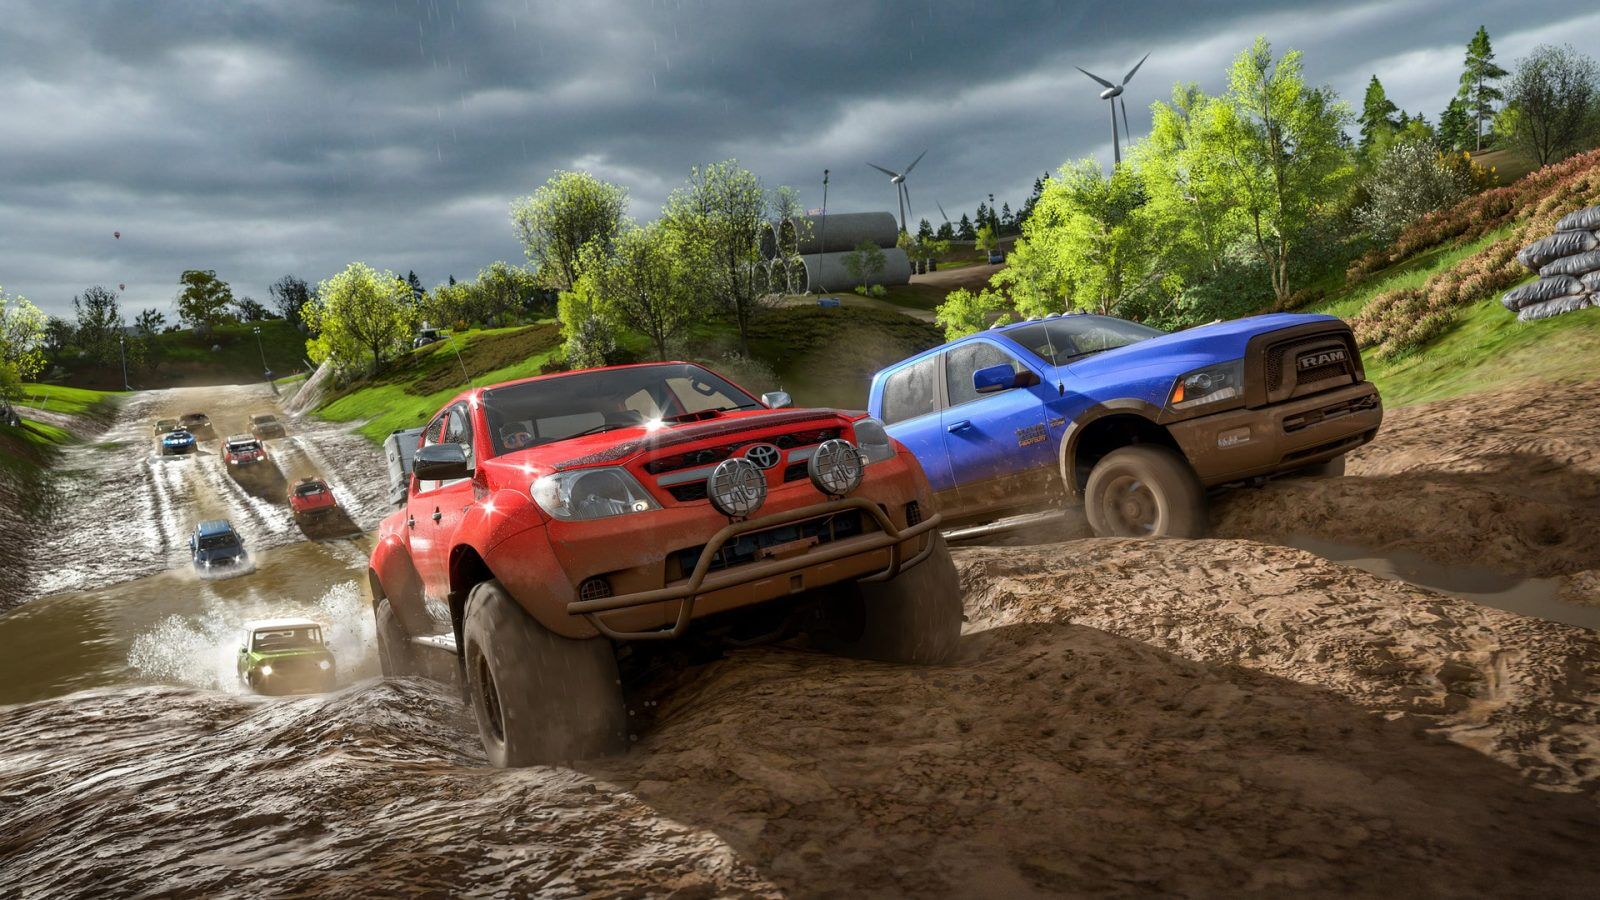 An image of two trucks racing through the mud in Forza Horizon 4.